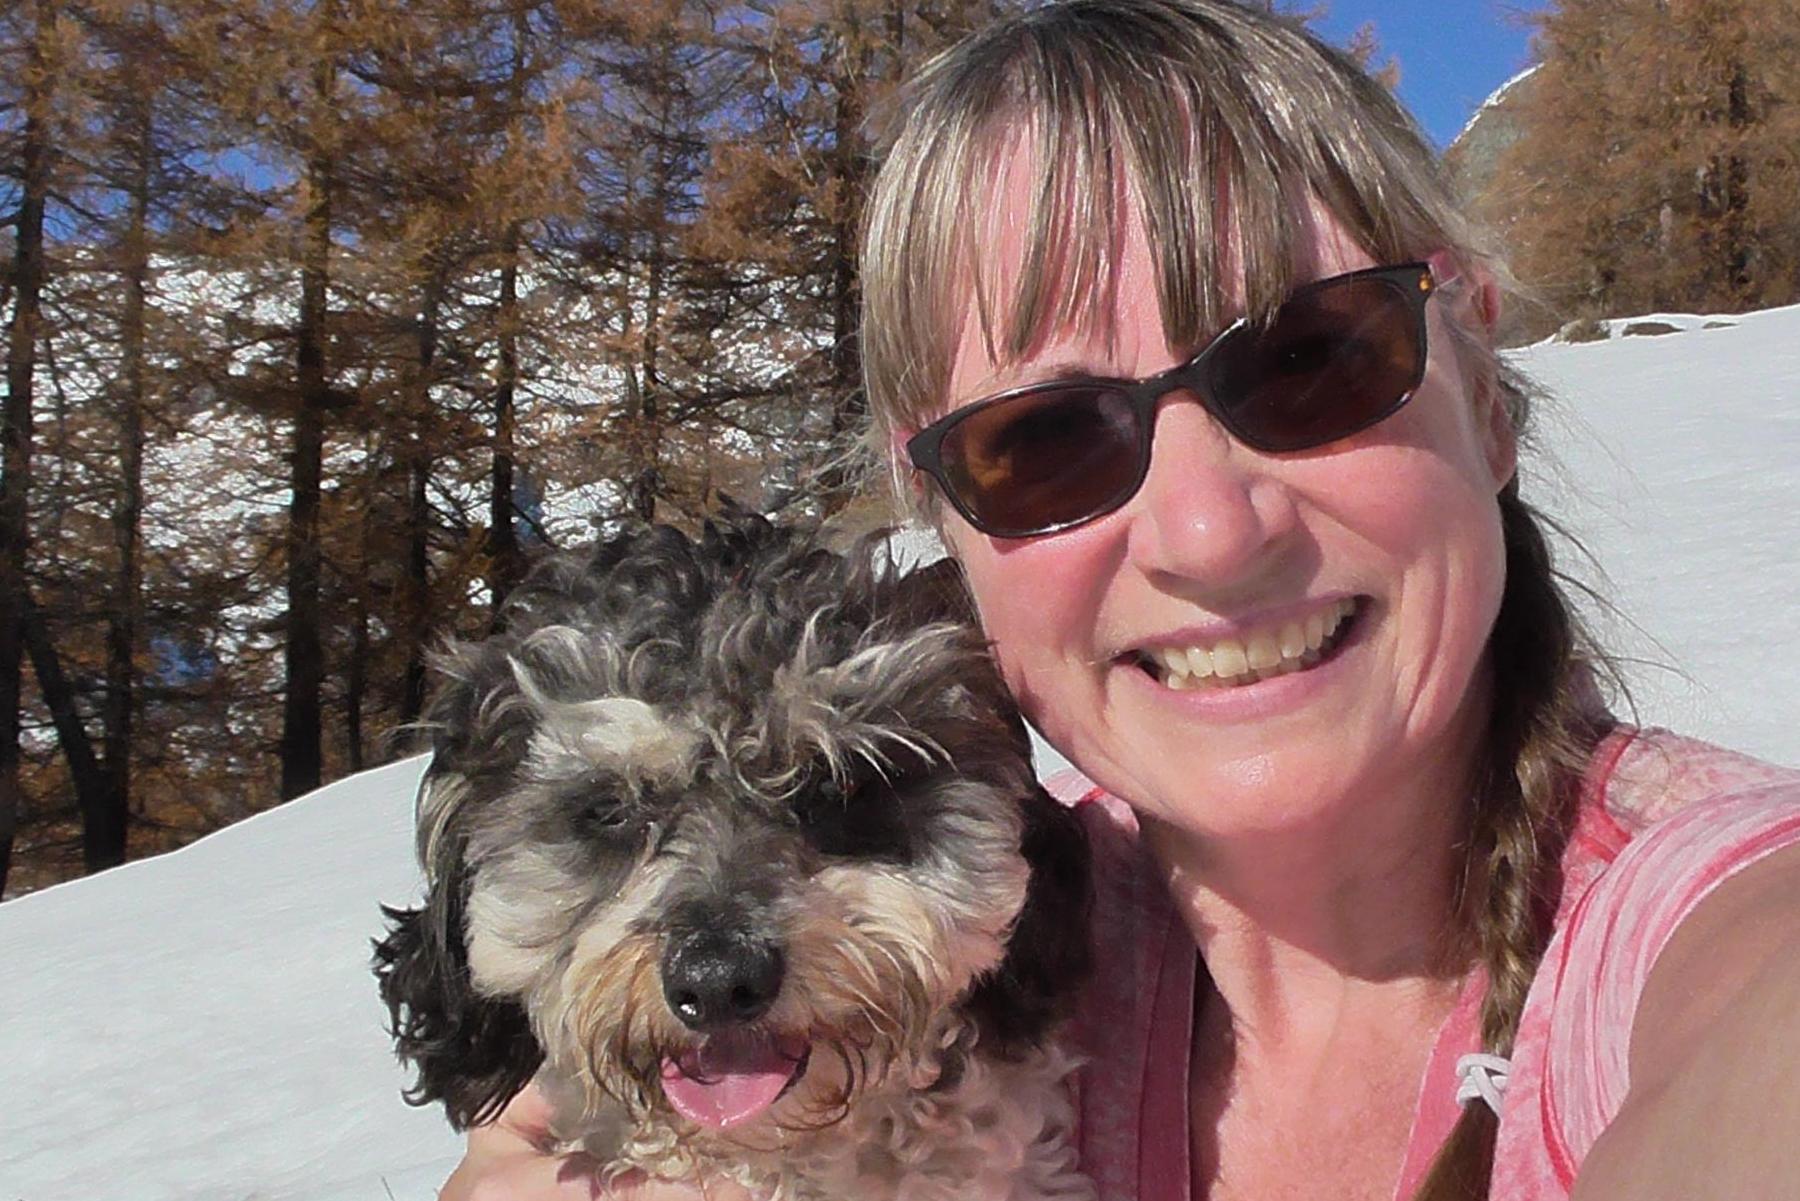 East Lancs woman pens funny book about travelling with dogs